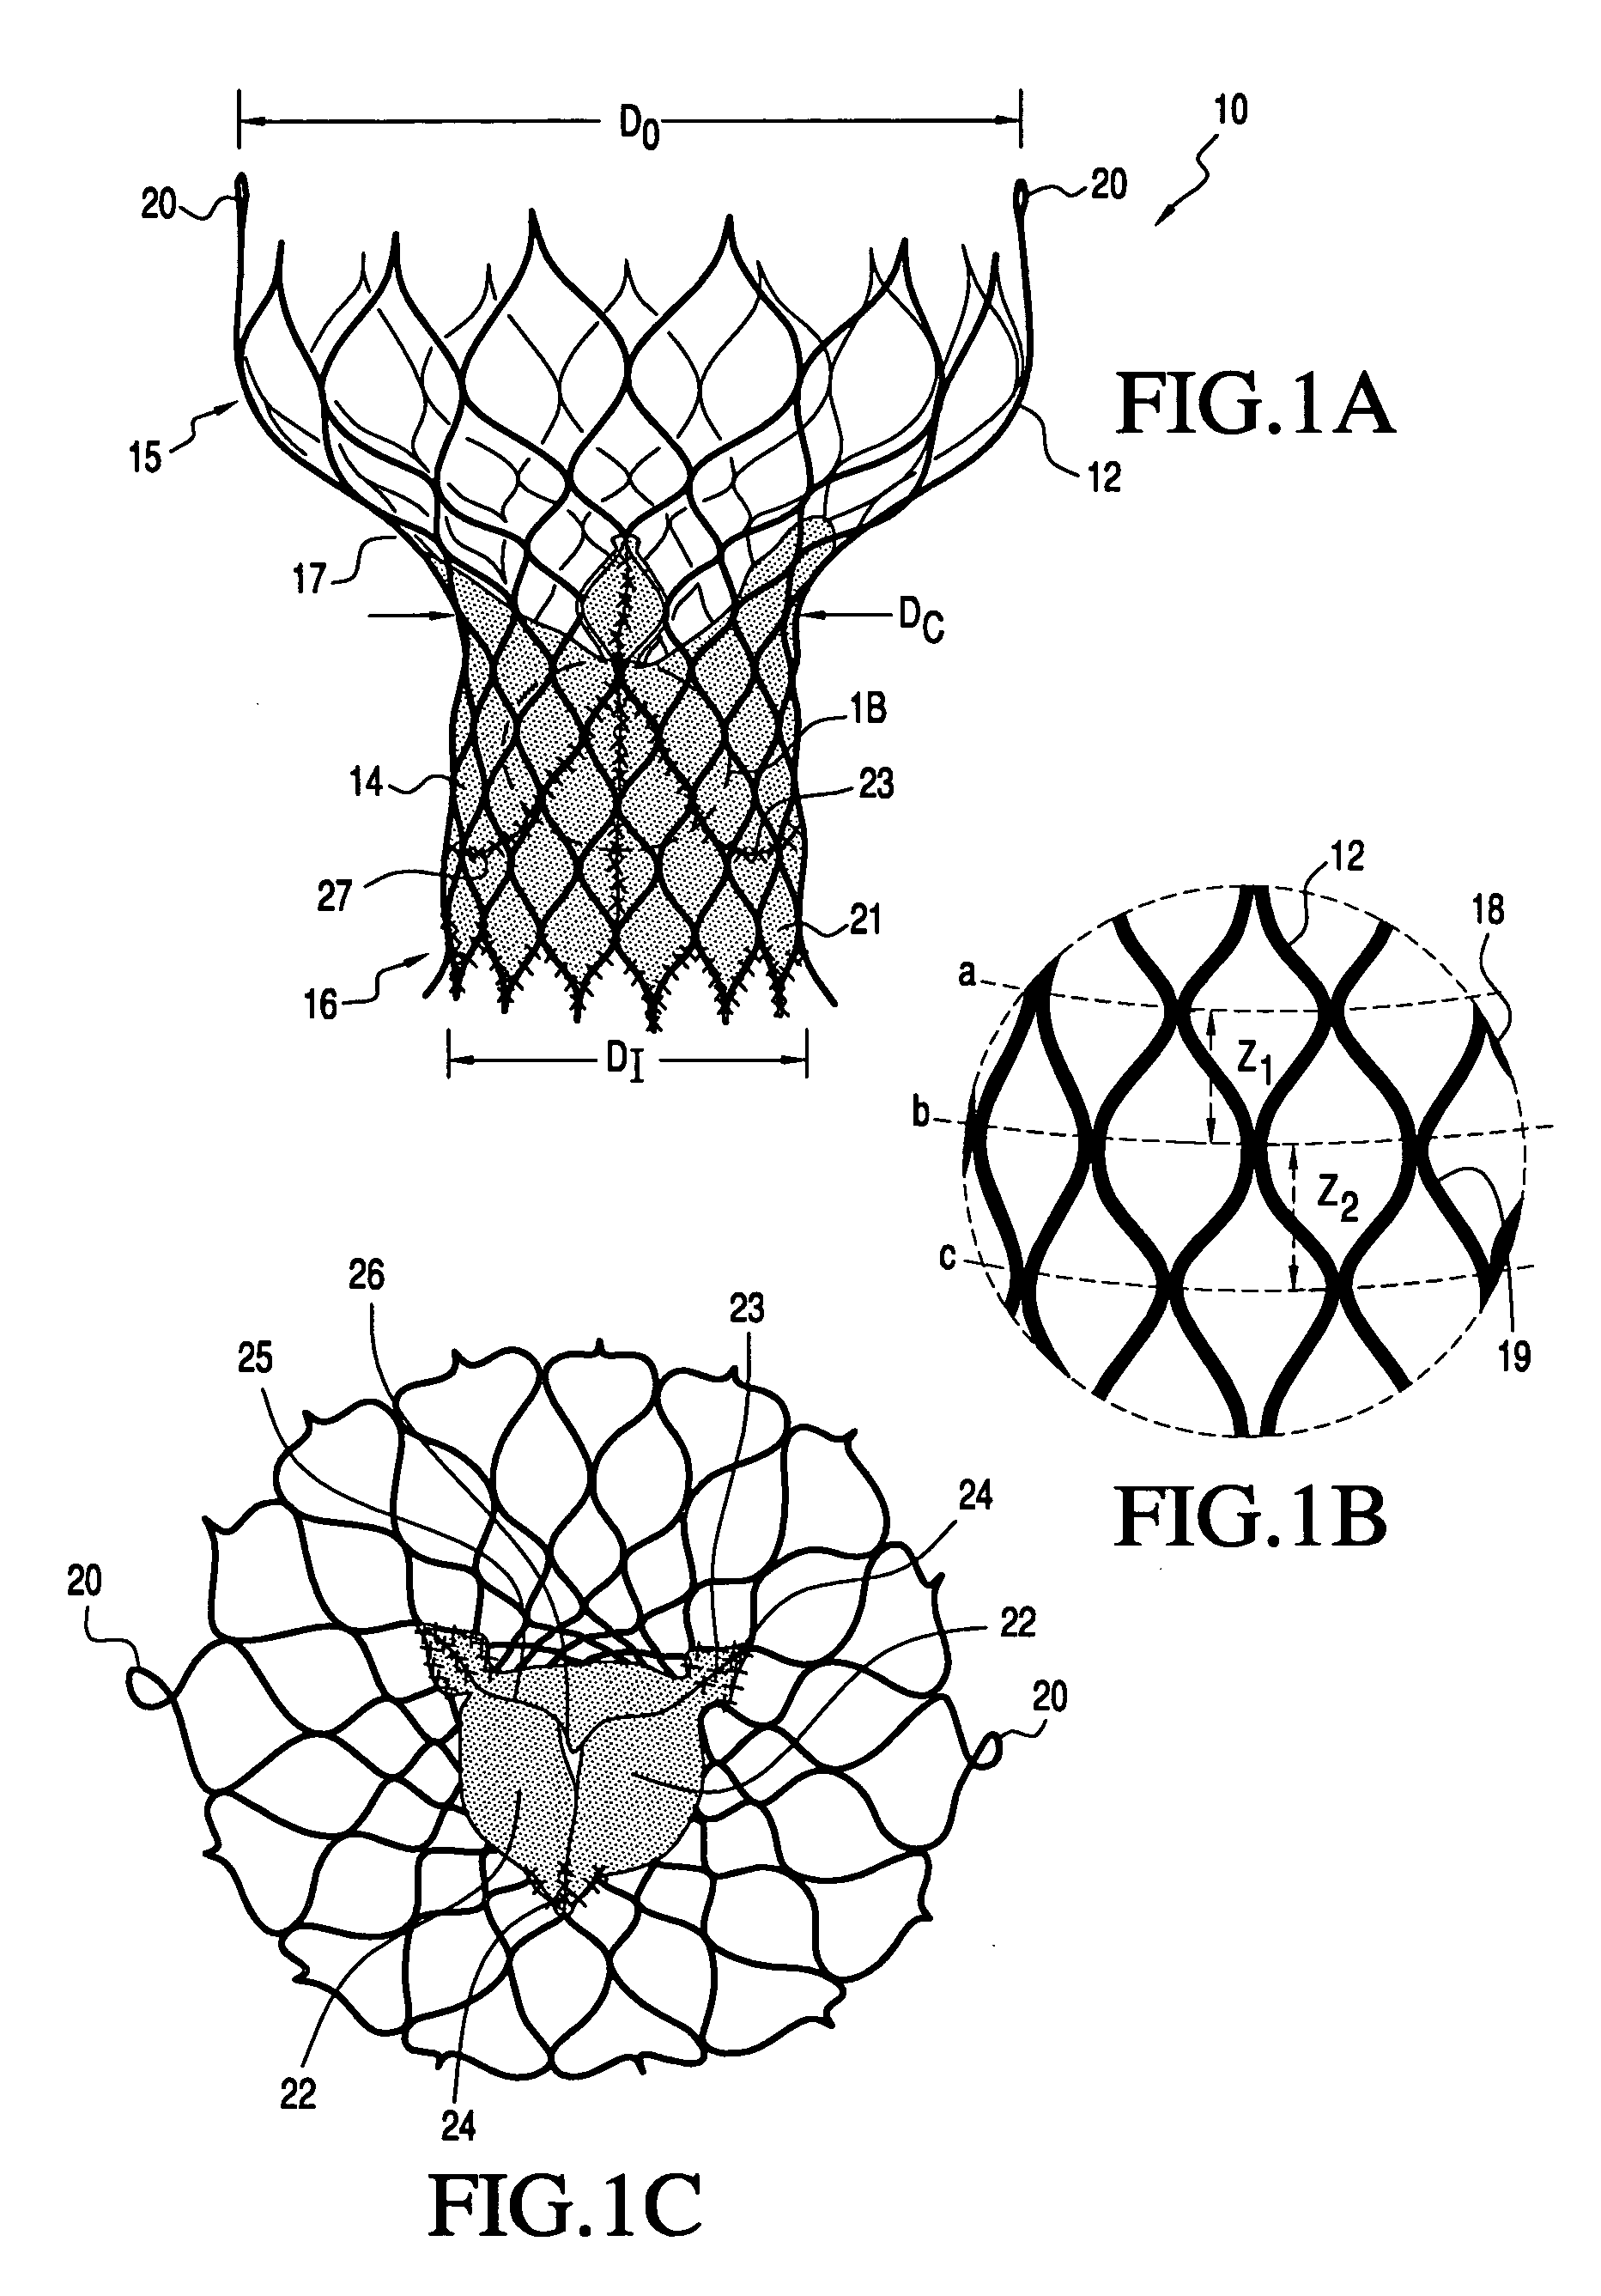 Heart valve prosthesis and methods of manufacture and use